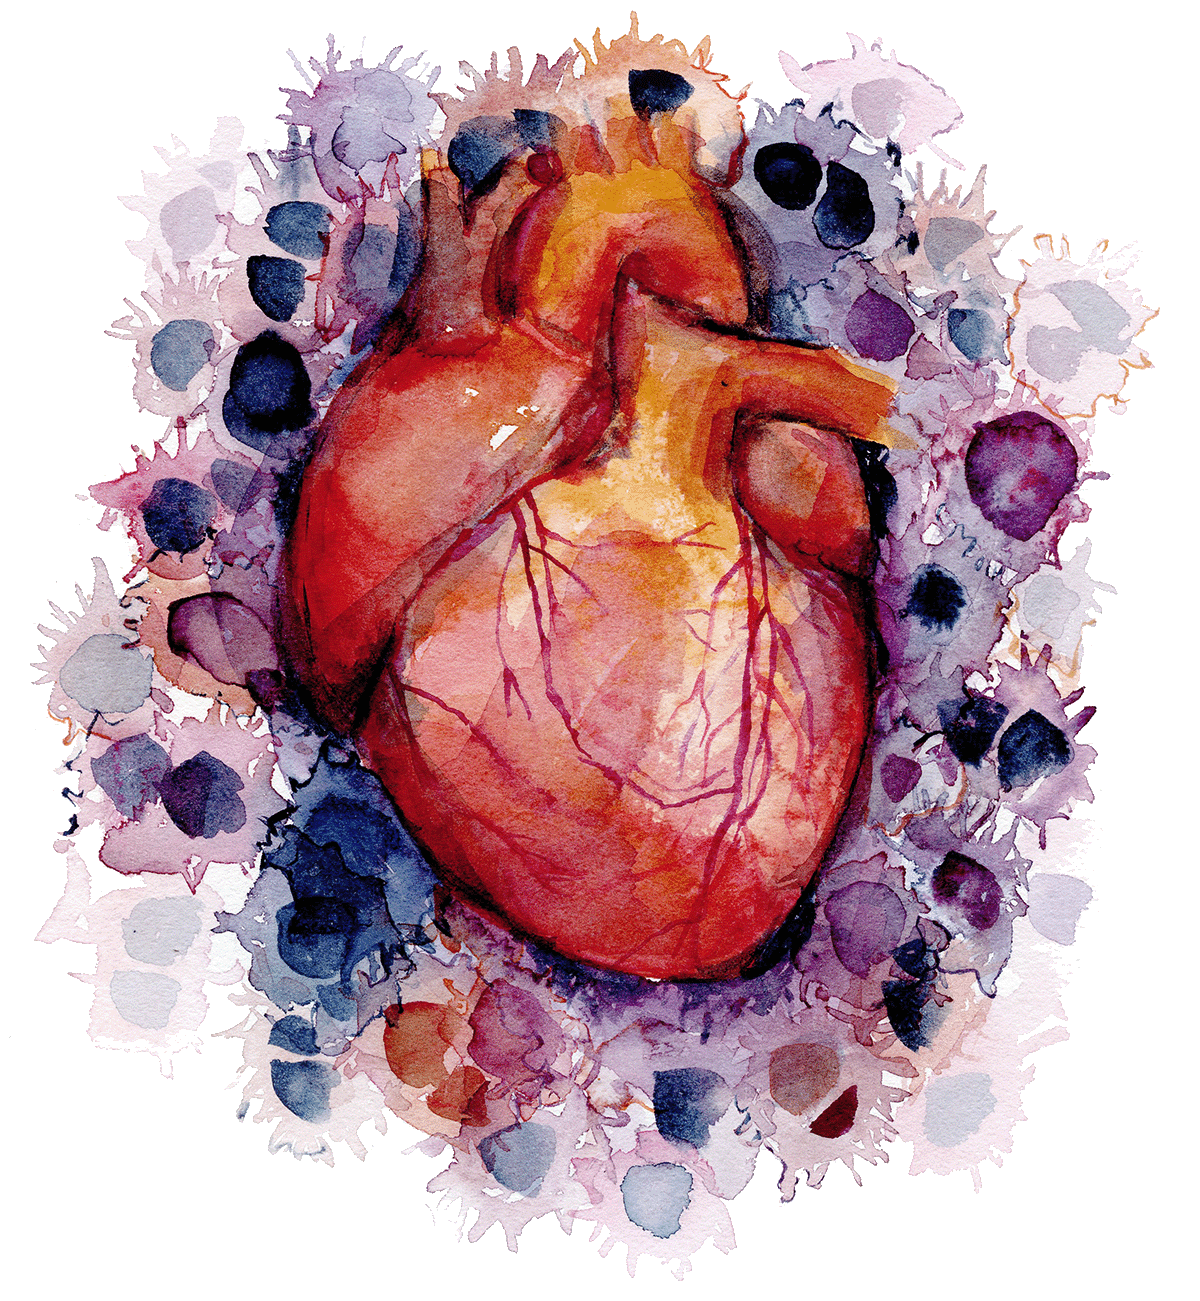 Illustration of the heart surrounded by cancer cells